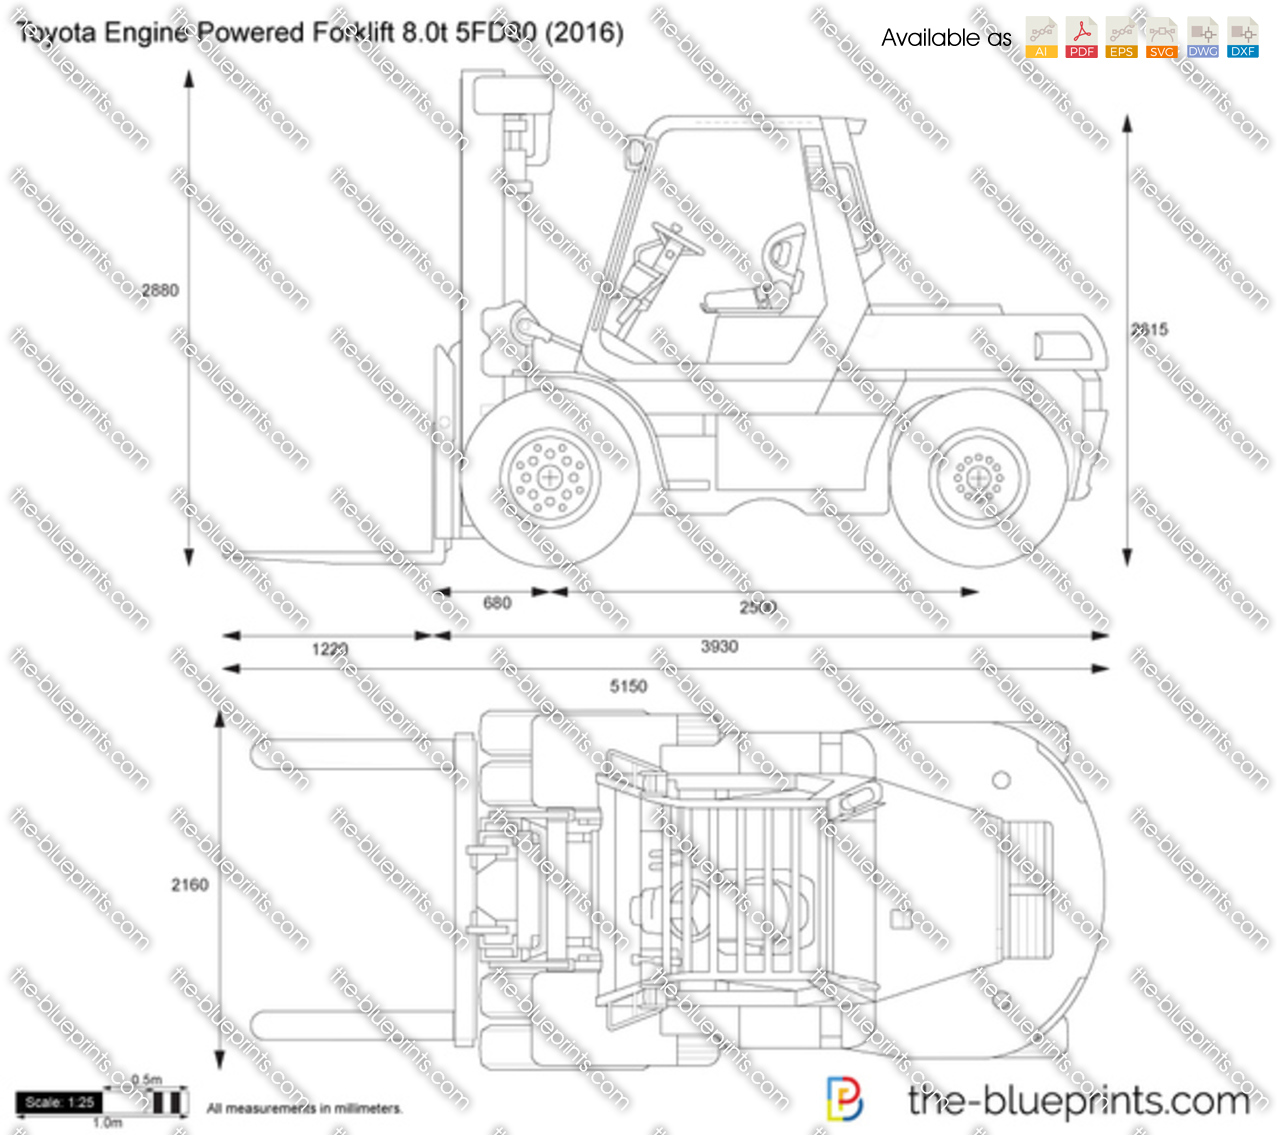 Toyota Engine Powered Forklift 8.0t 5FD80